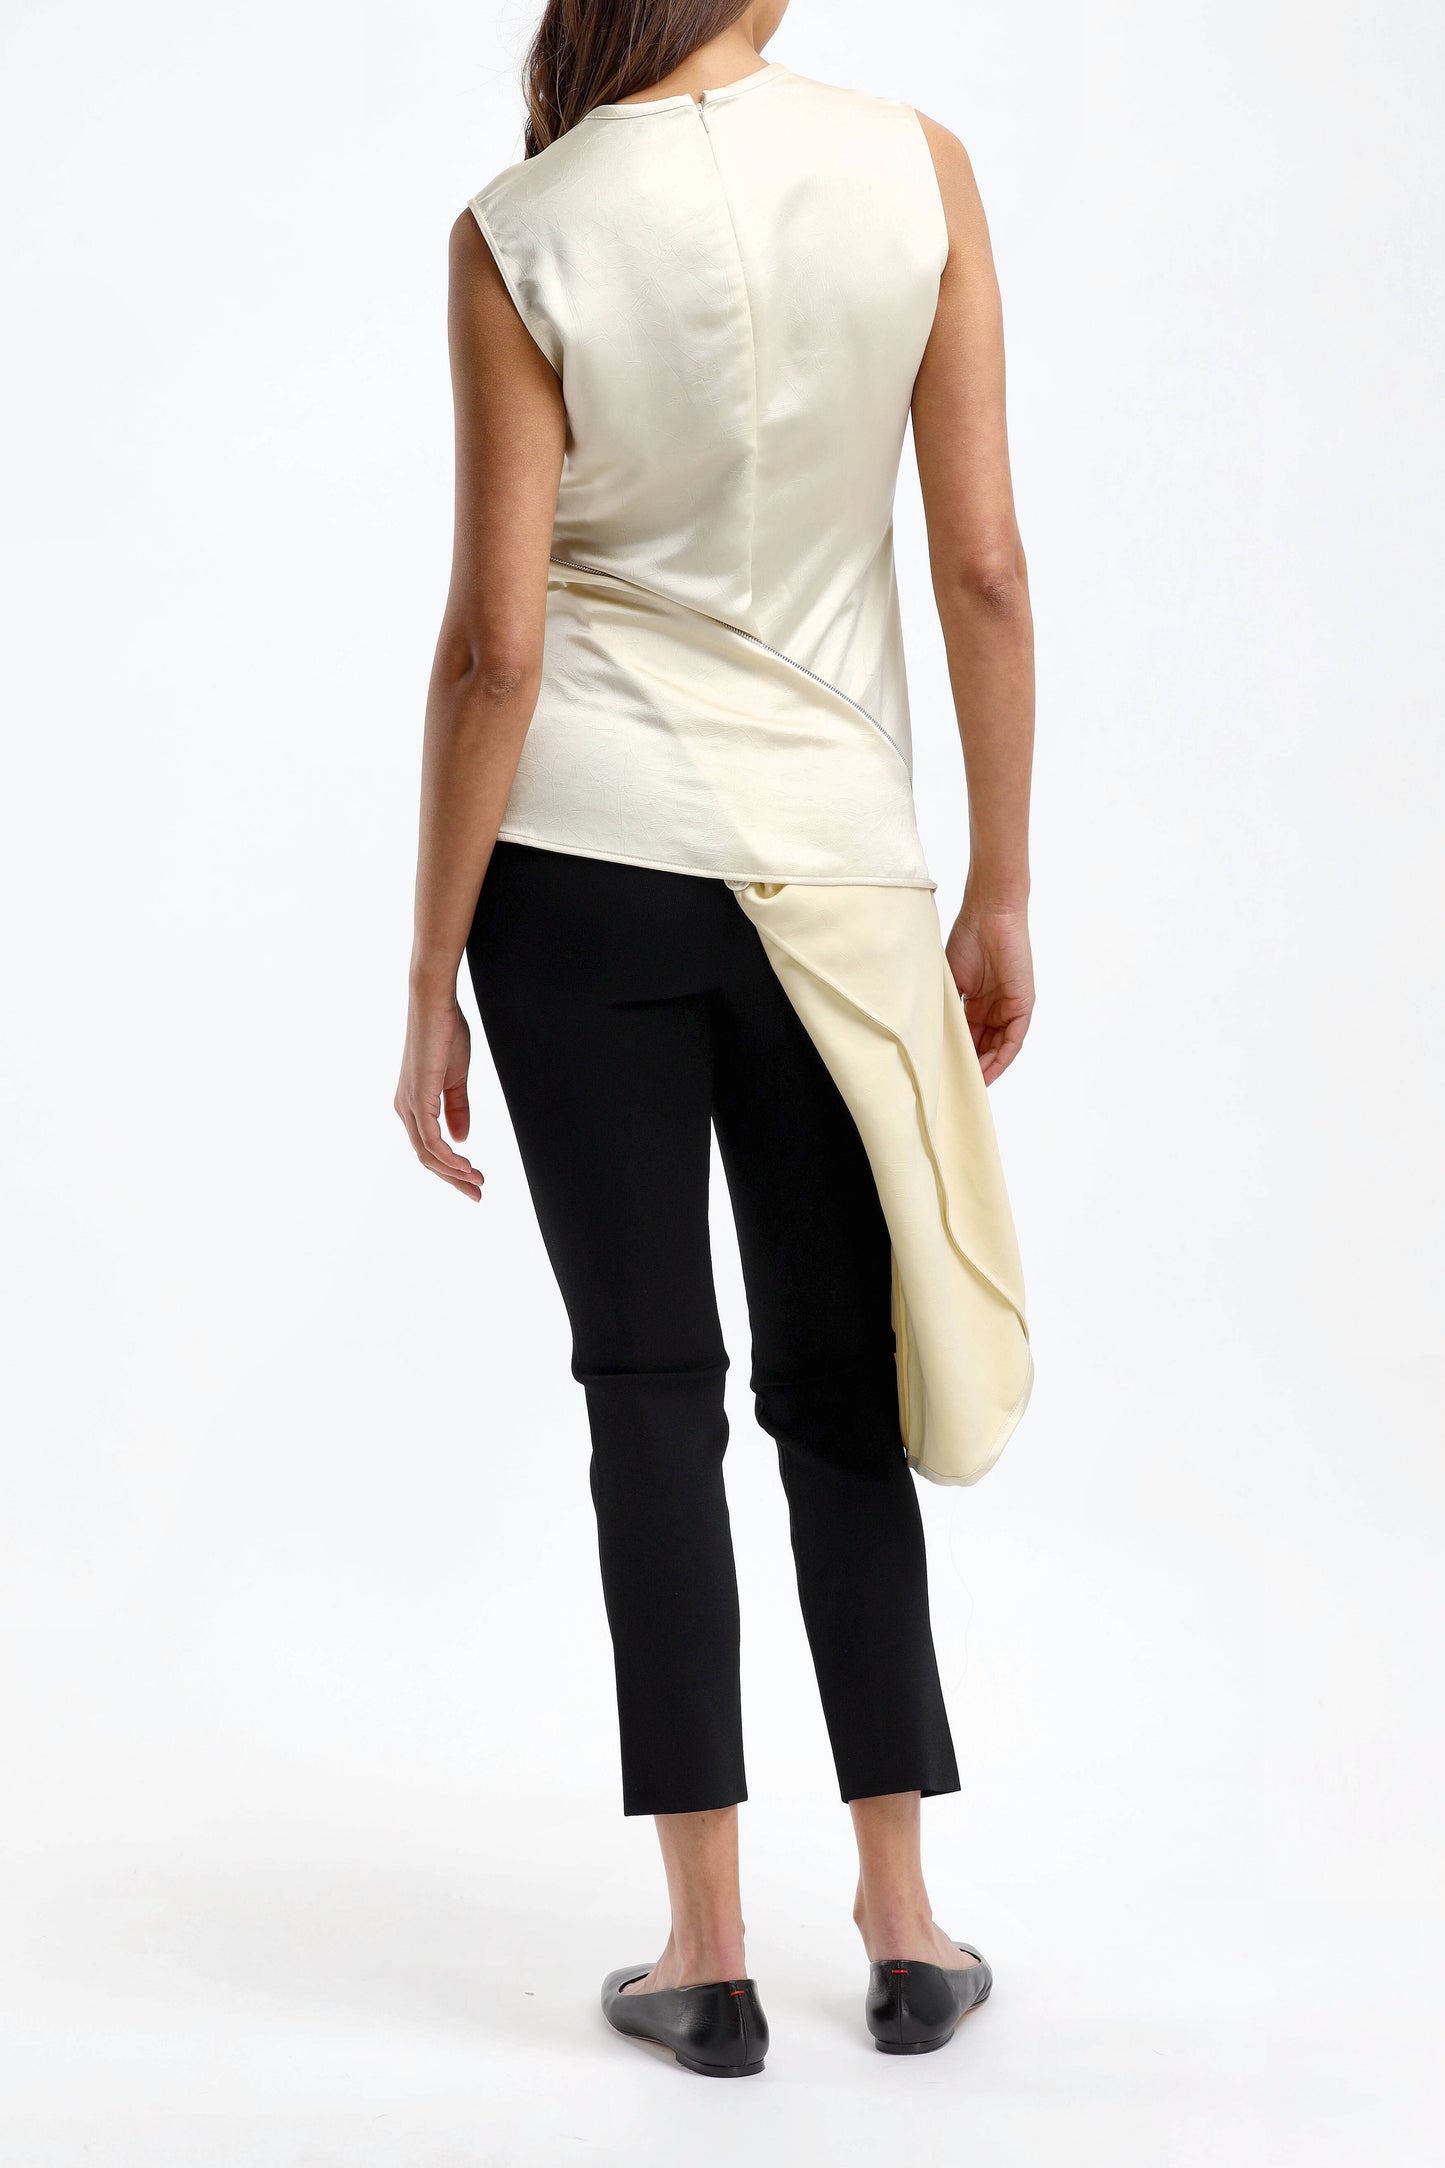 Top Zip Detail in Off WhiteJW Anderson - Anita Hass